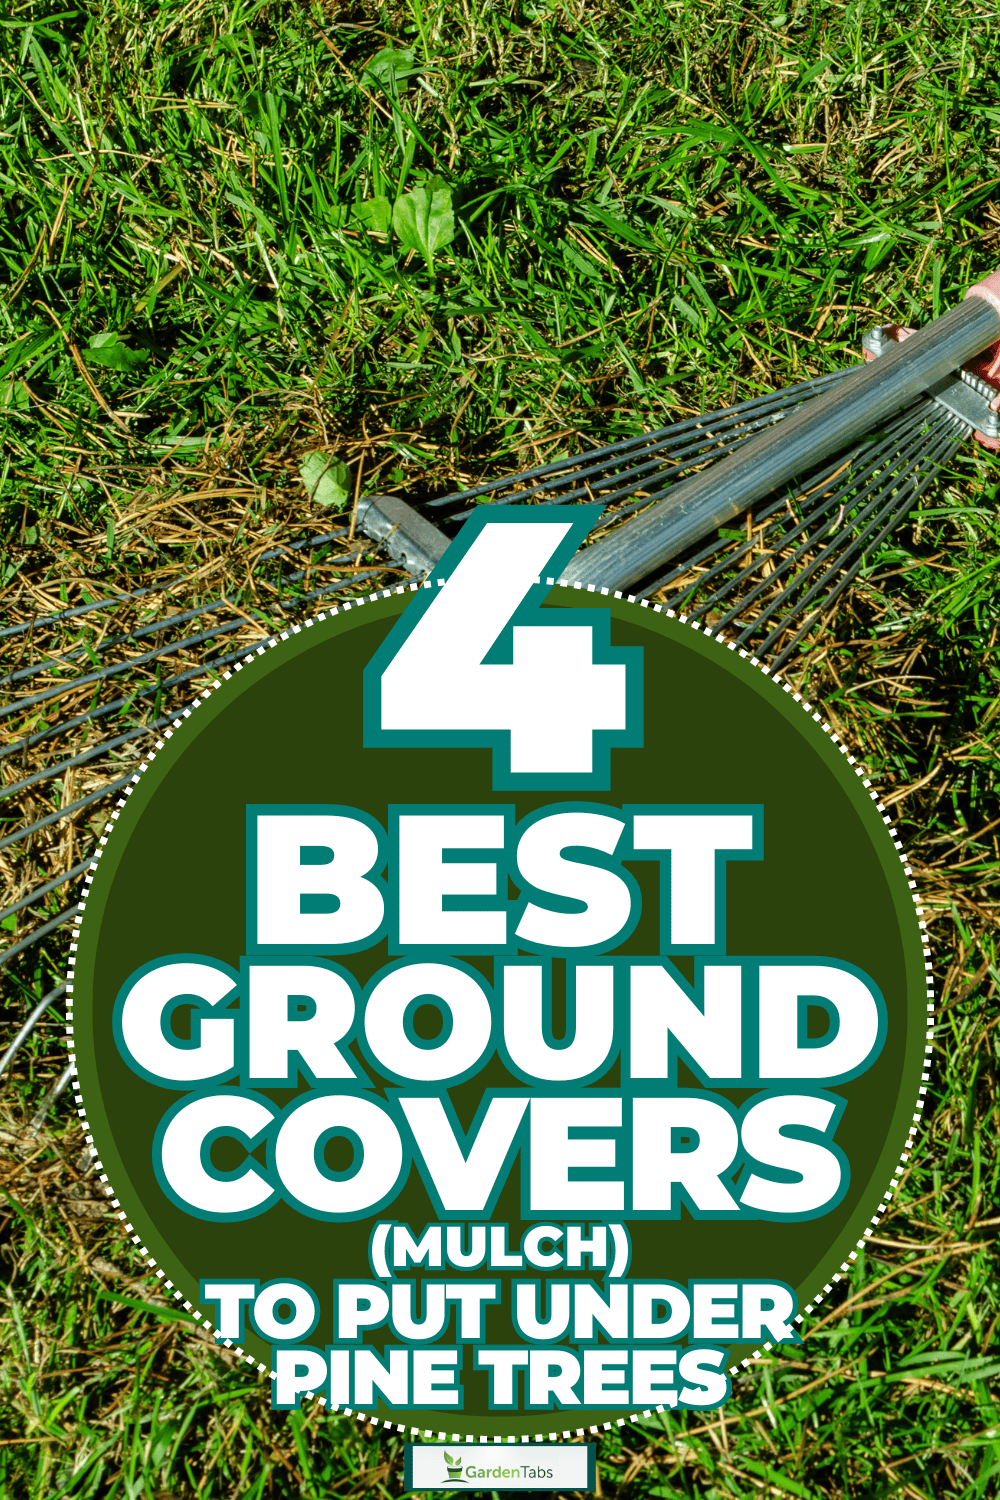 4 Best Ground Covers (Mulch) To Put Under Pine Trees